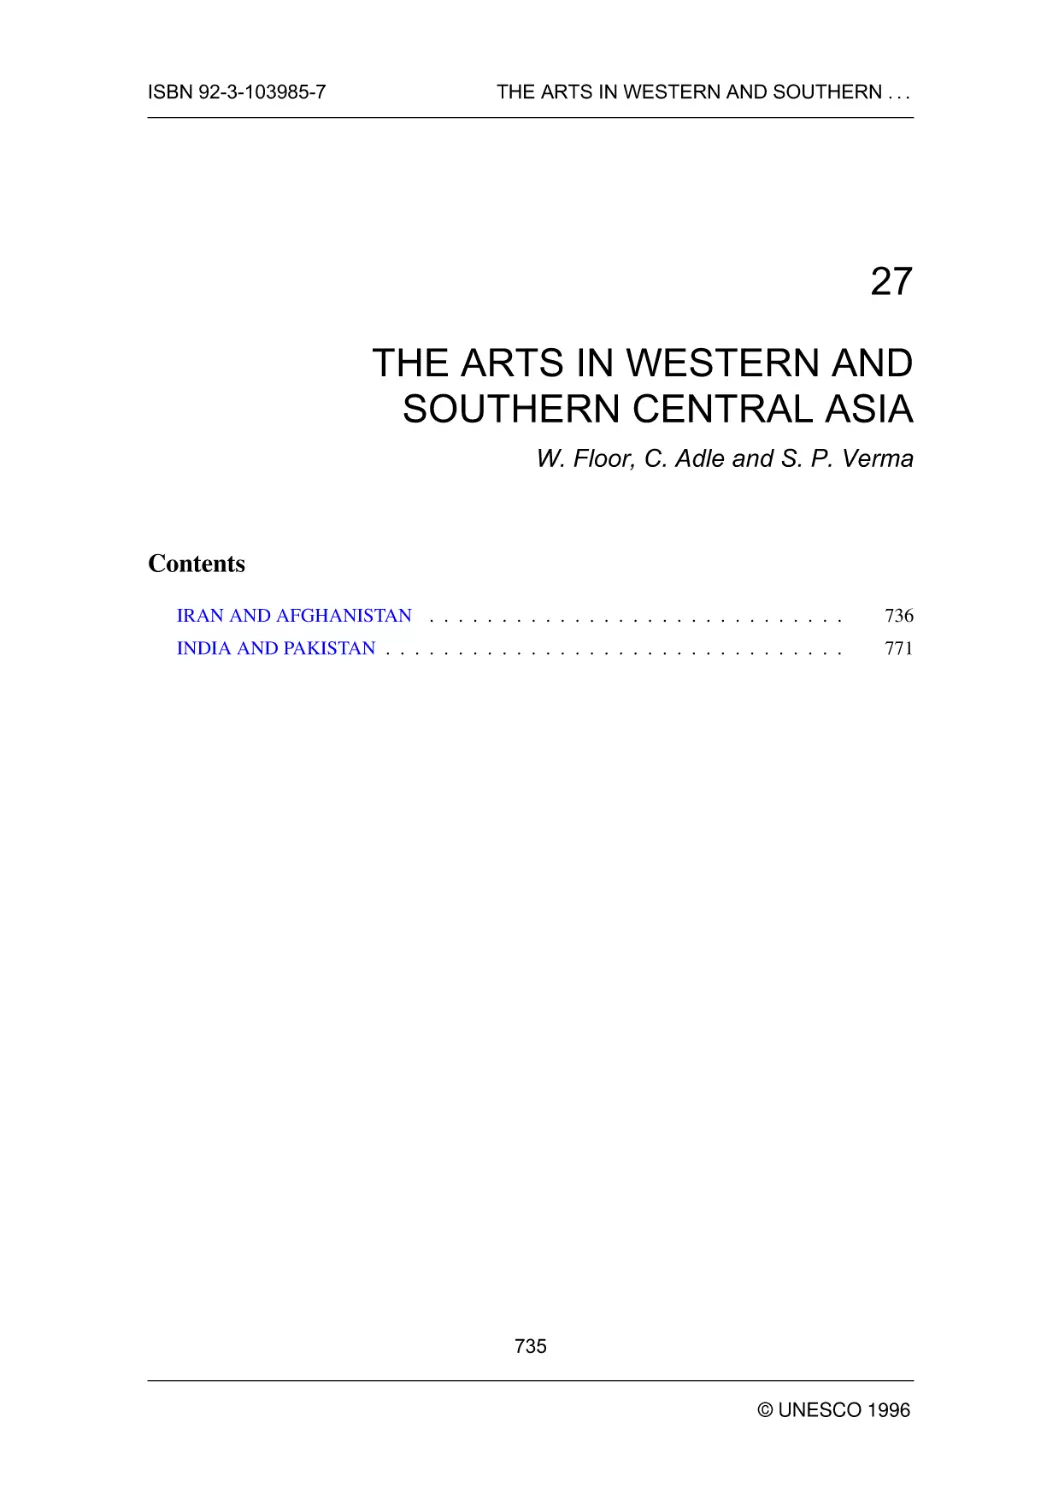 THE ARTS IN WESTERN AND SOUTHERN CENTRAL ASIA